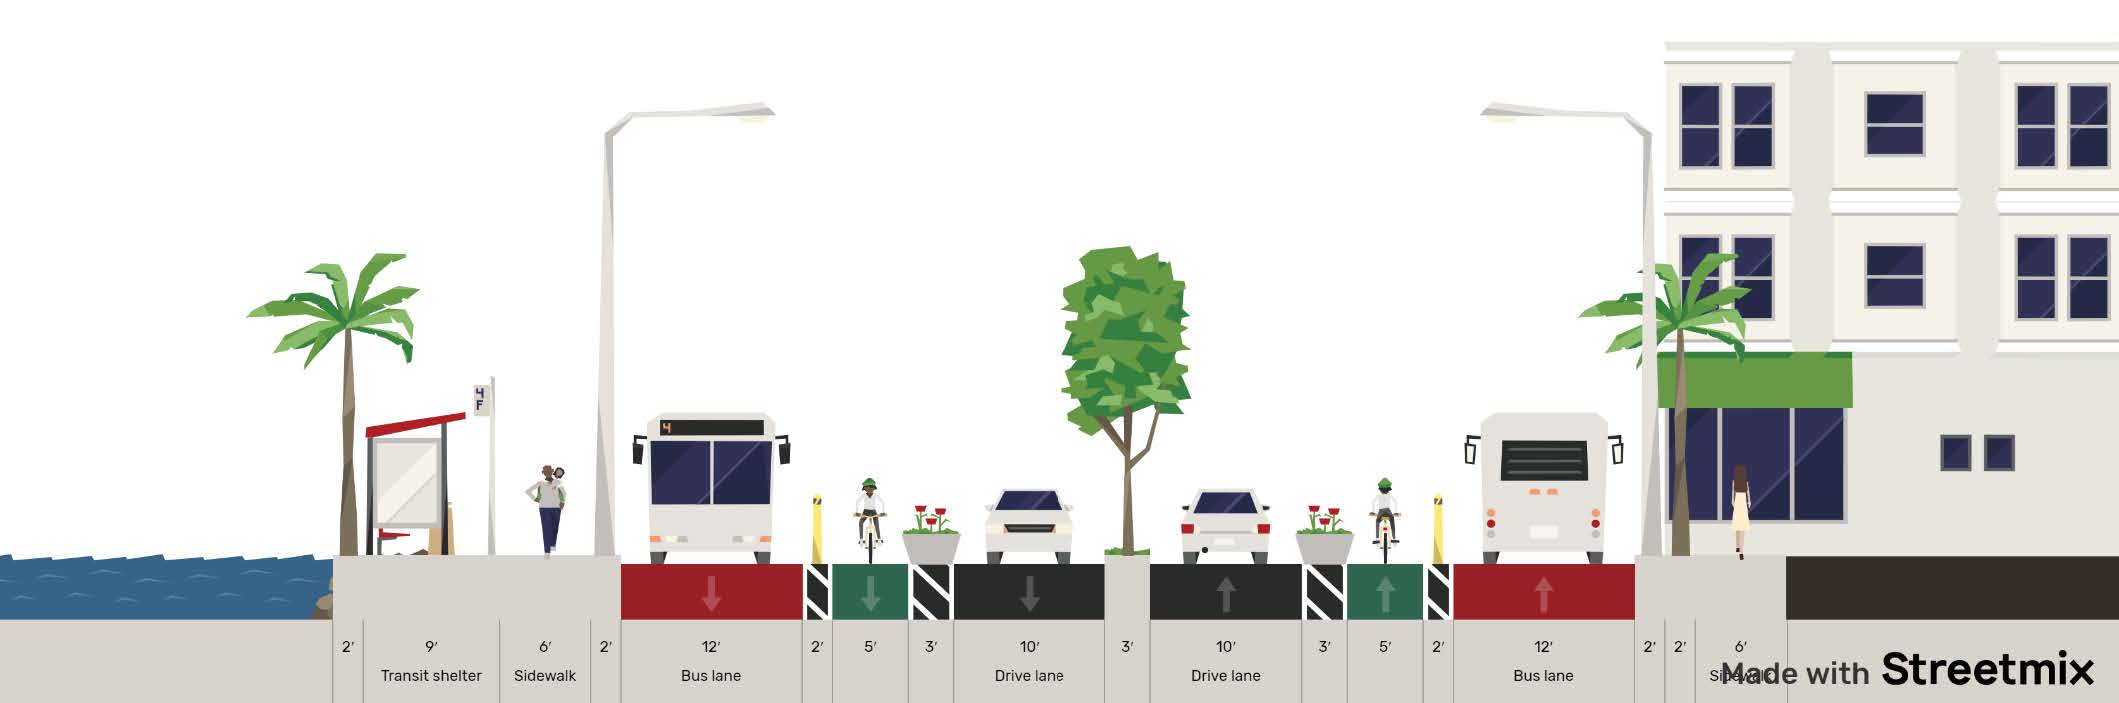 Cross section of a street showing bus only lanes, bike lanes, general travel lanes, and sidewalks.